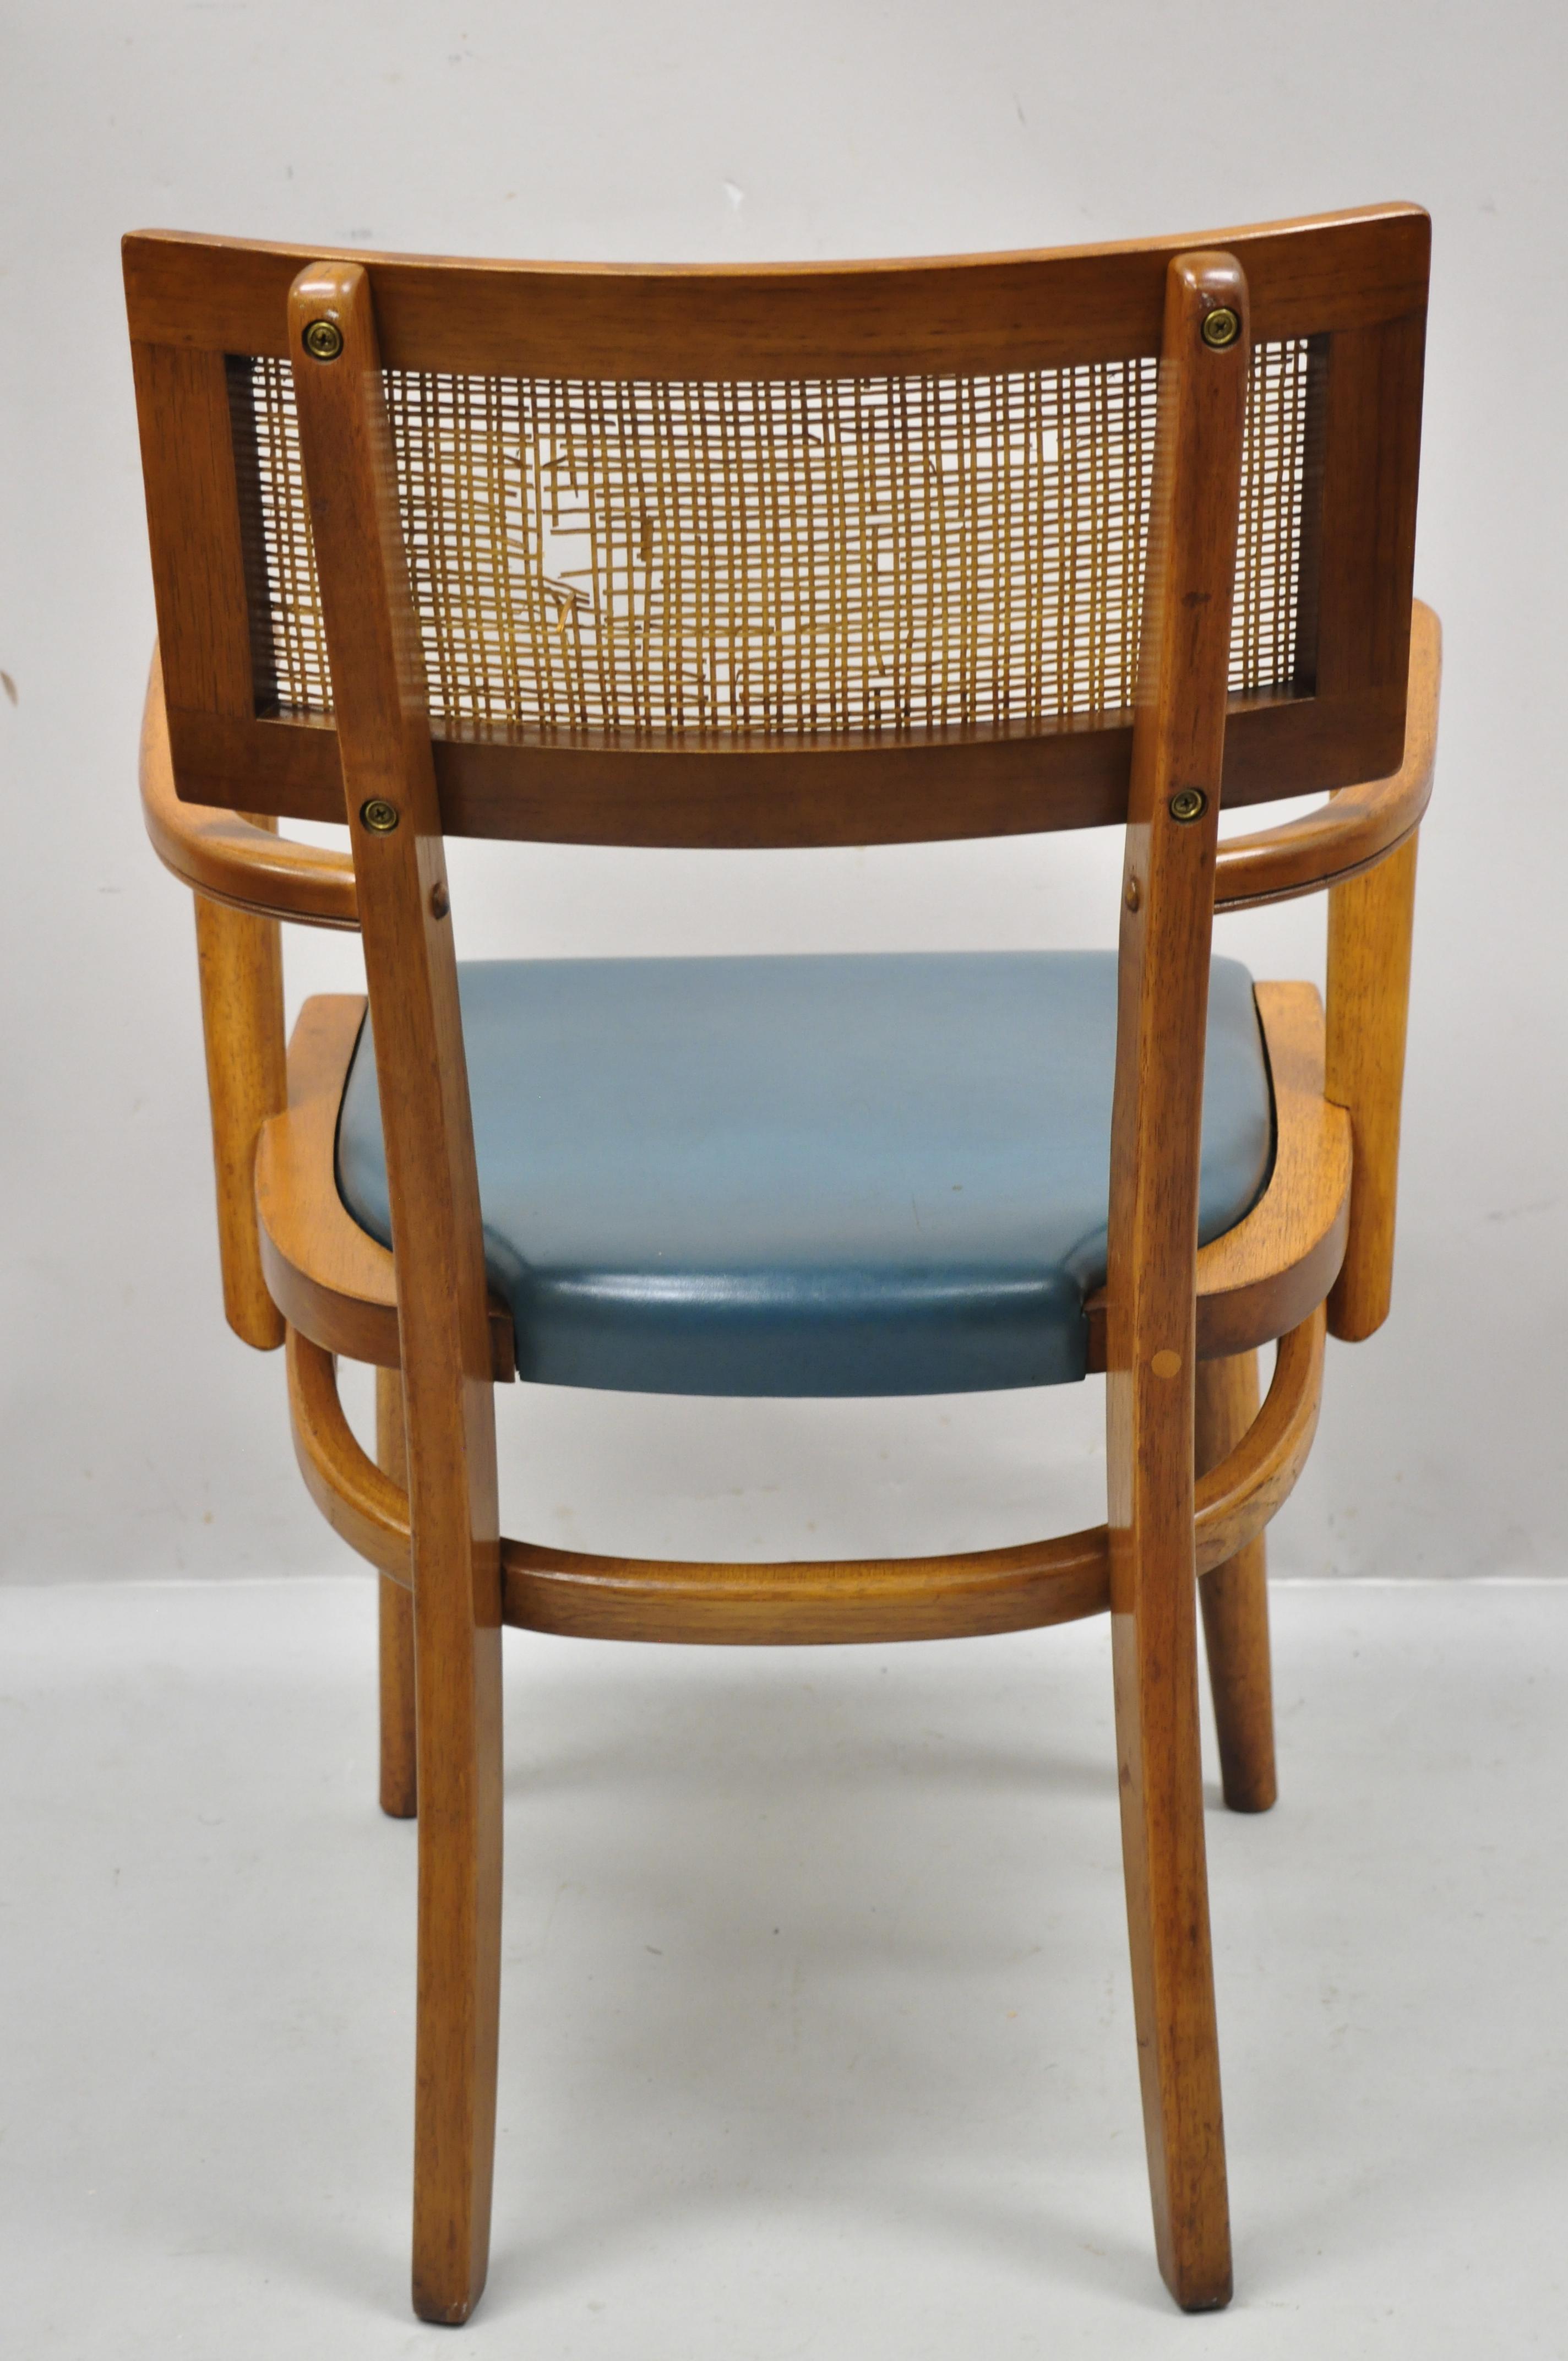 The Boling Changebak Chair Walnut Cane Back Mid Century by Boling Chair Co. 'A' 2